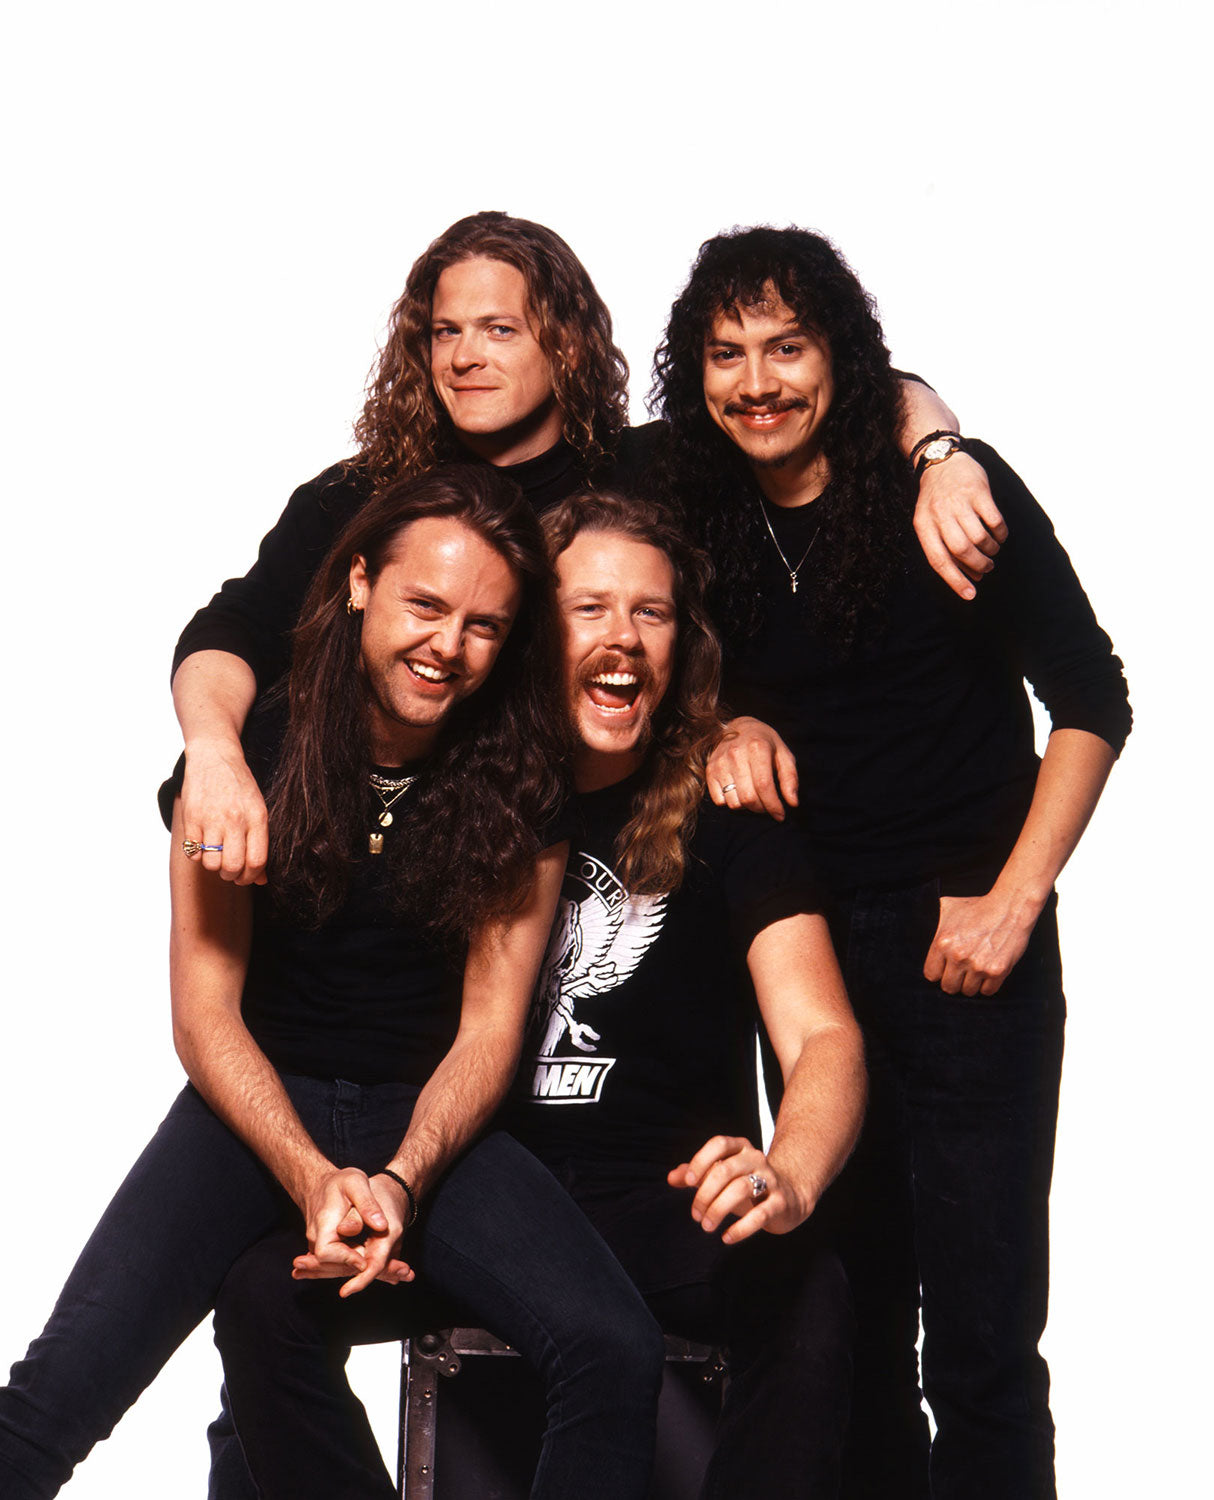 Band Laughing Portrait, 1991